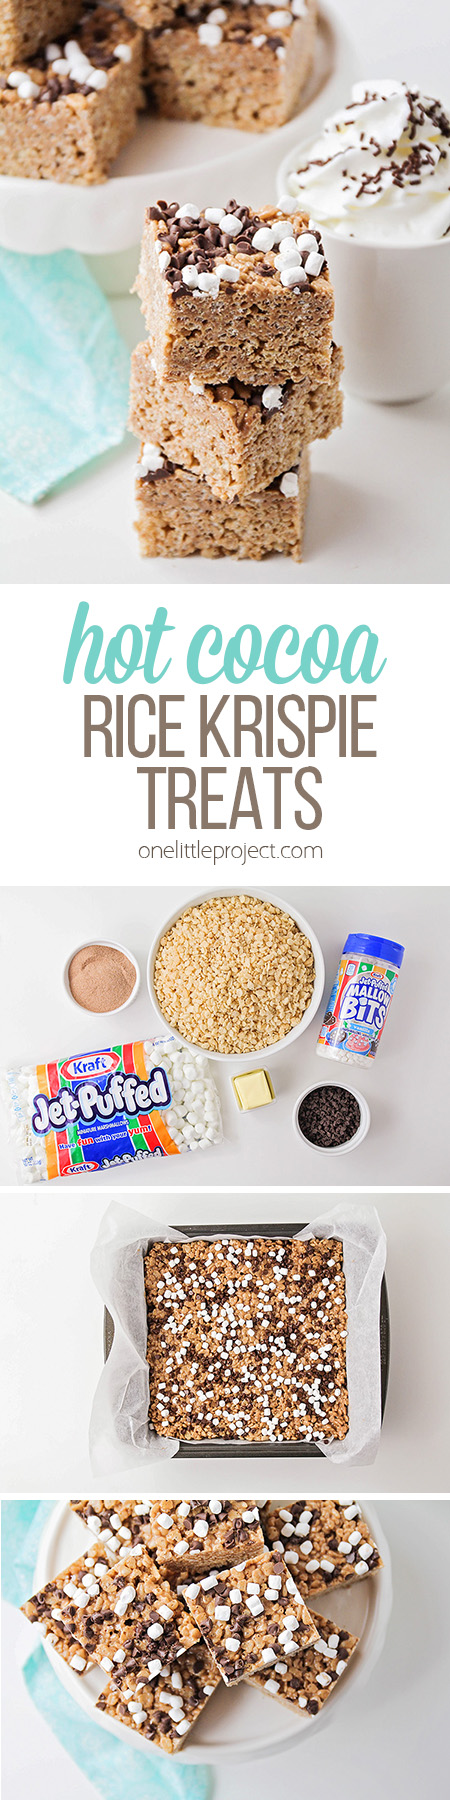 These irresistible and delicious hot cocoa rice krispie treats have all the flavors you love in hot chocolate, in a sweet and crunchy rice krispie treat!